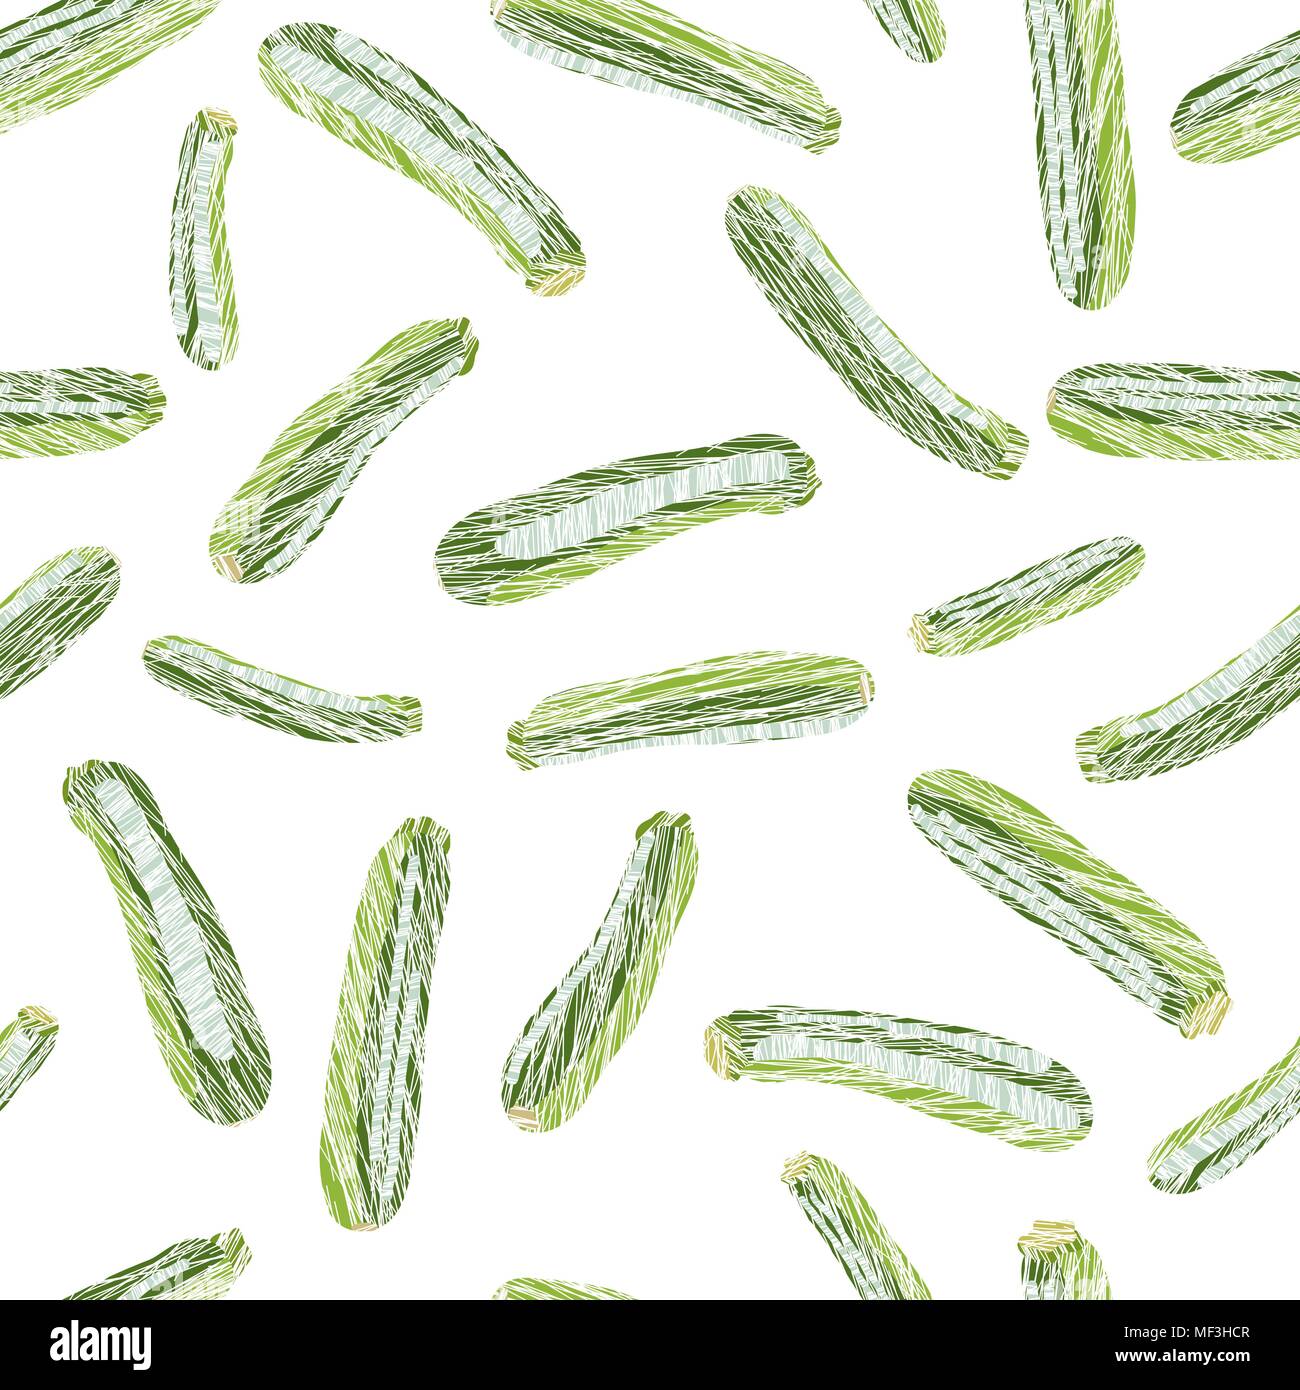 Green zucchini. Scratched seamless pattern. Bountiful harvest texture. Garden background. Organic vegan food. Summer vegetables. Healthy lifestyle. Stock Vector